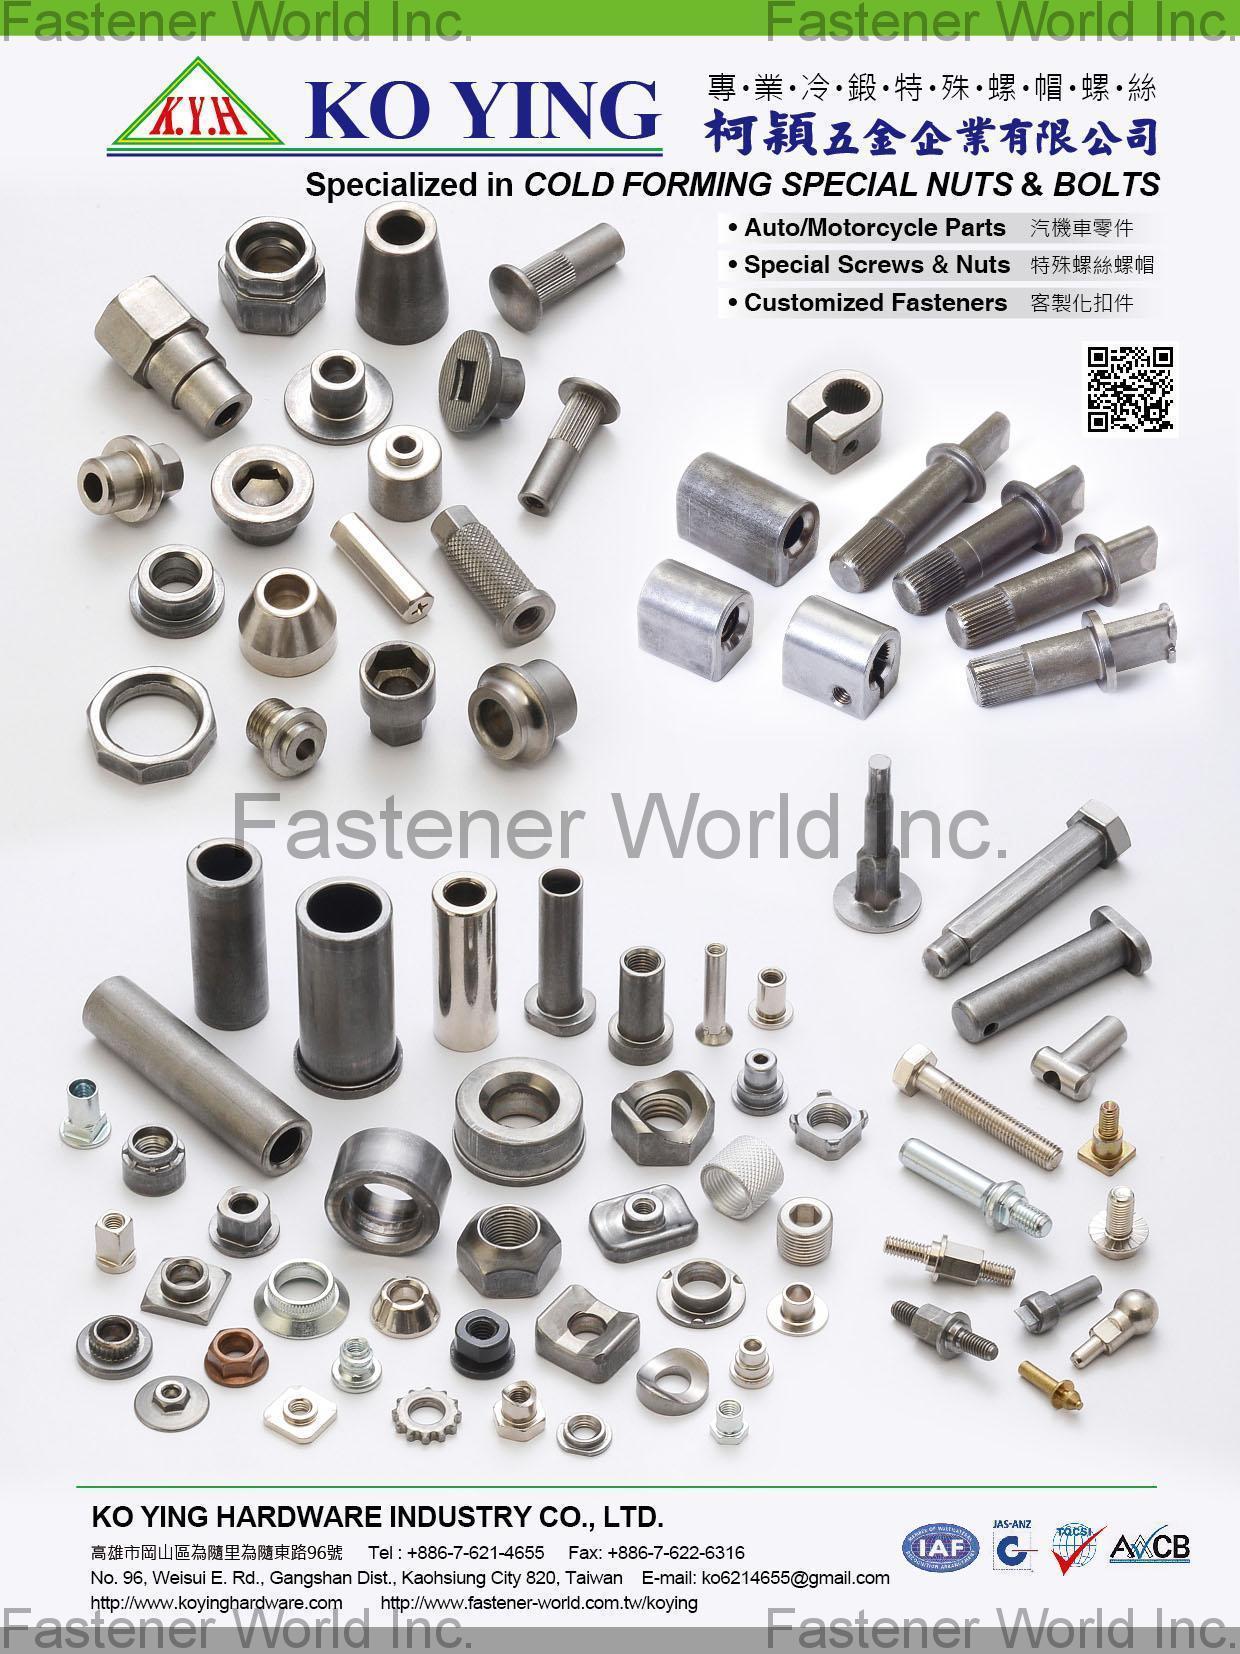 Automotive Parts Motorcycle Fasteners, Automotive Fasteners, Construction Fasteners, Furniture Fasteners, Customize Fasteners